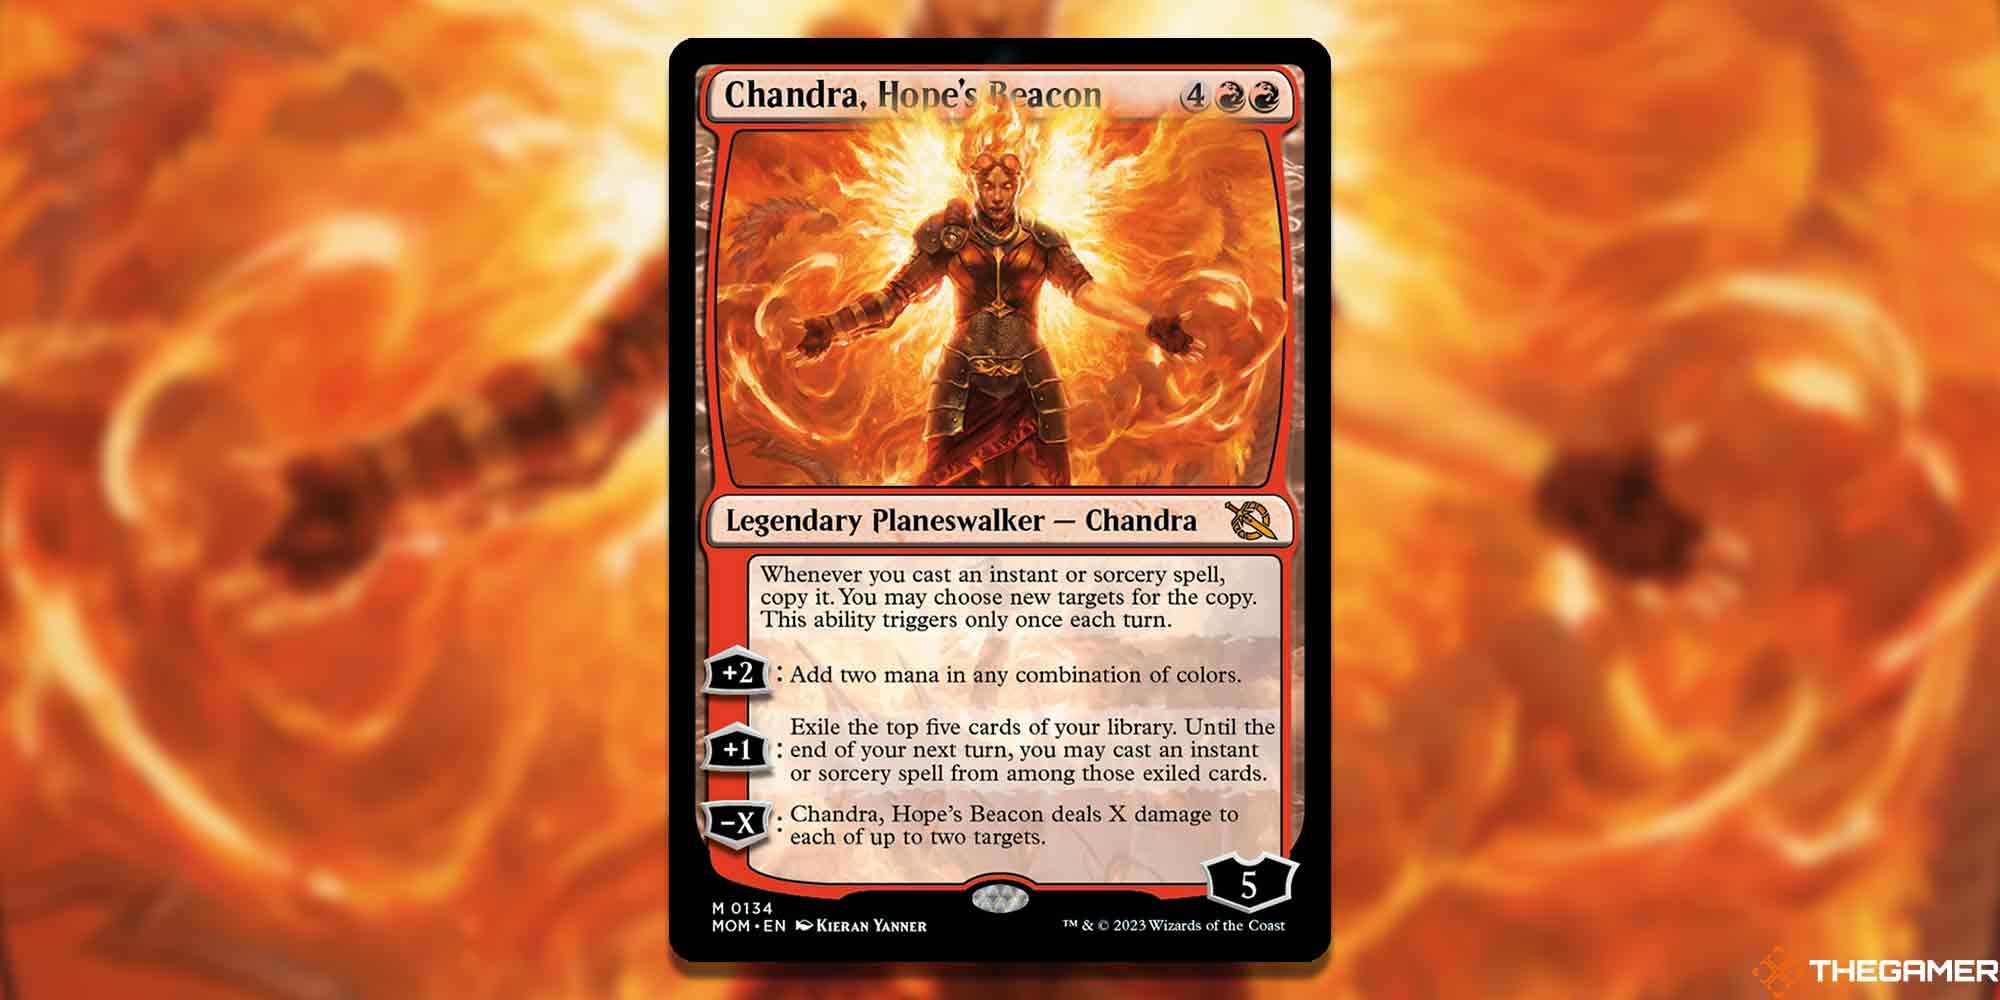 Chandra from Magic The Gathering, Hope's Beacon card and art background.